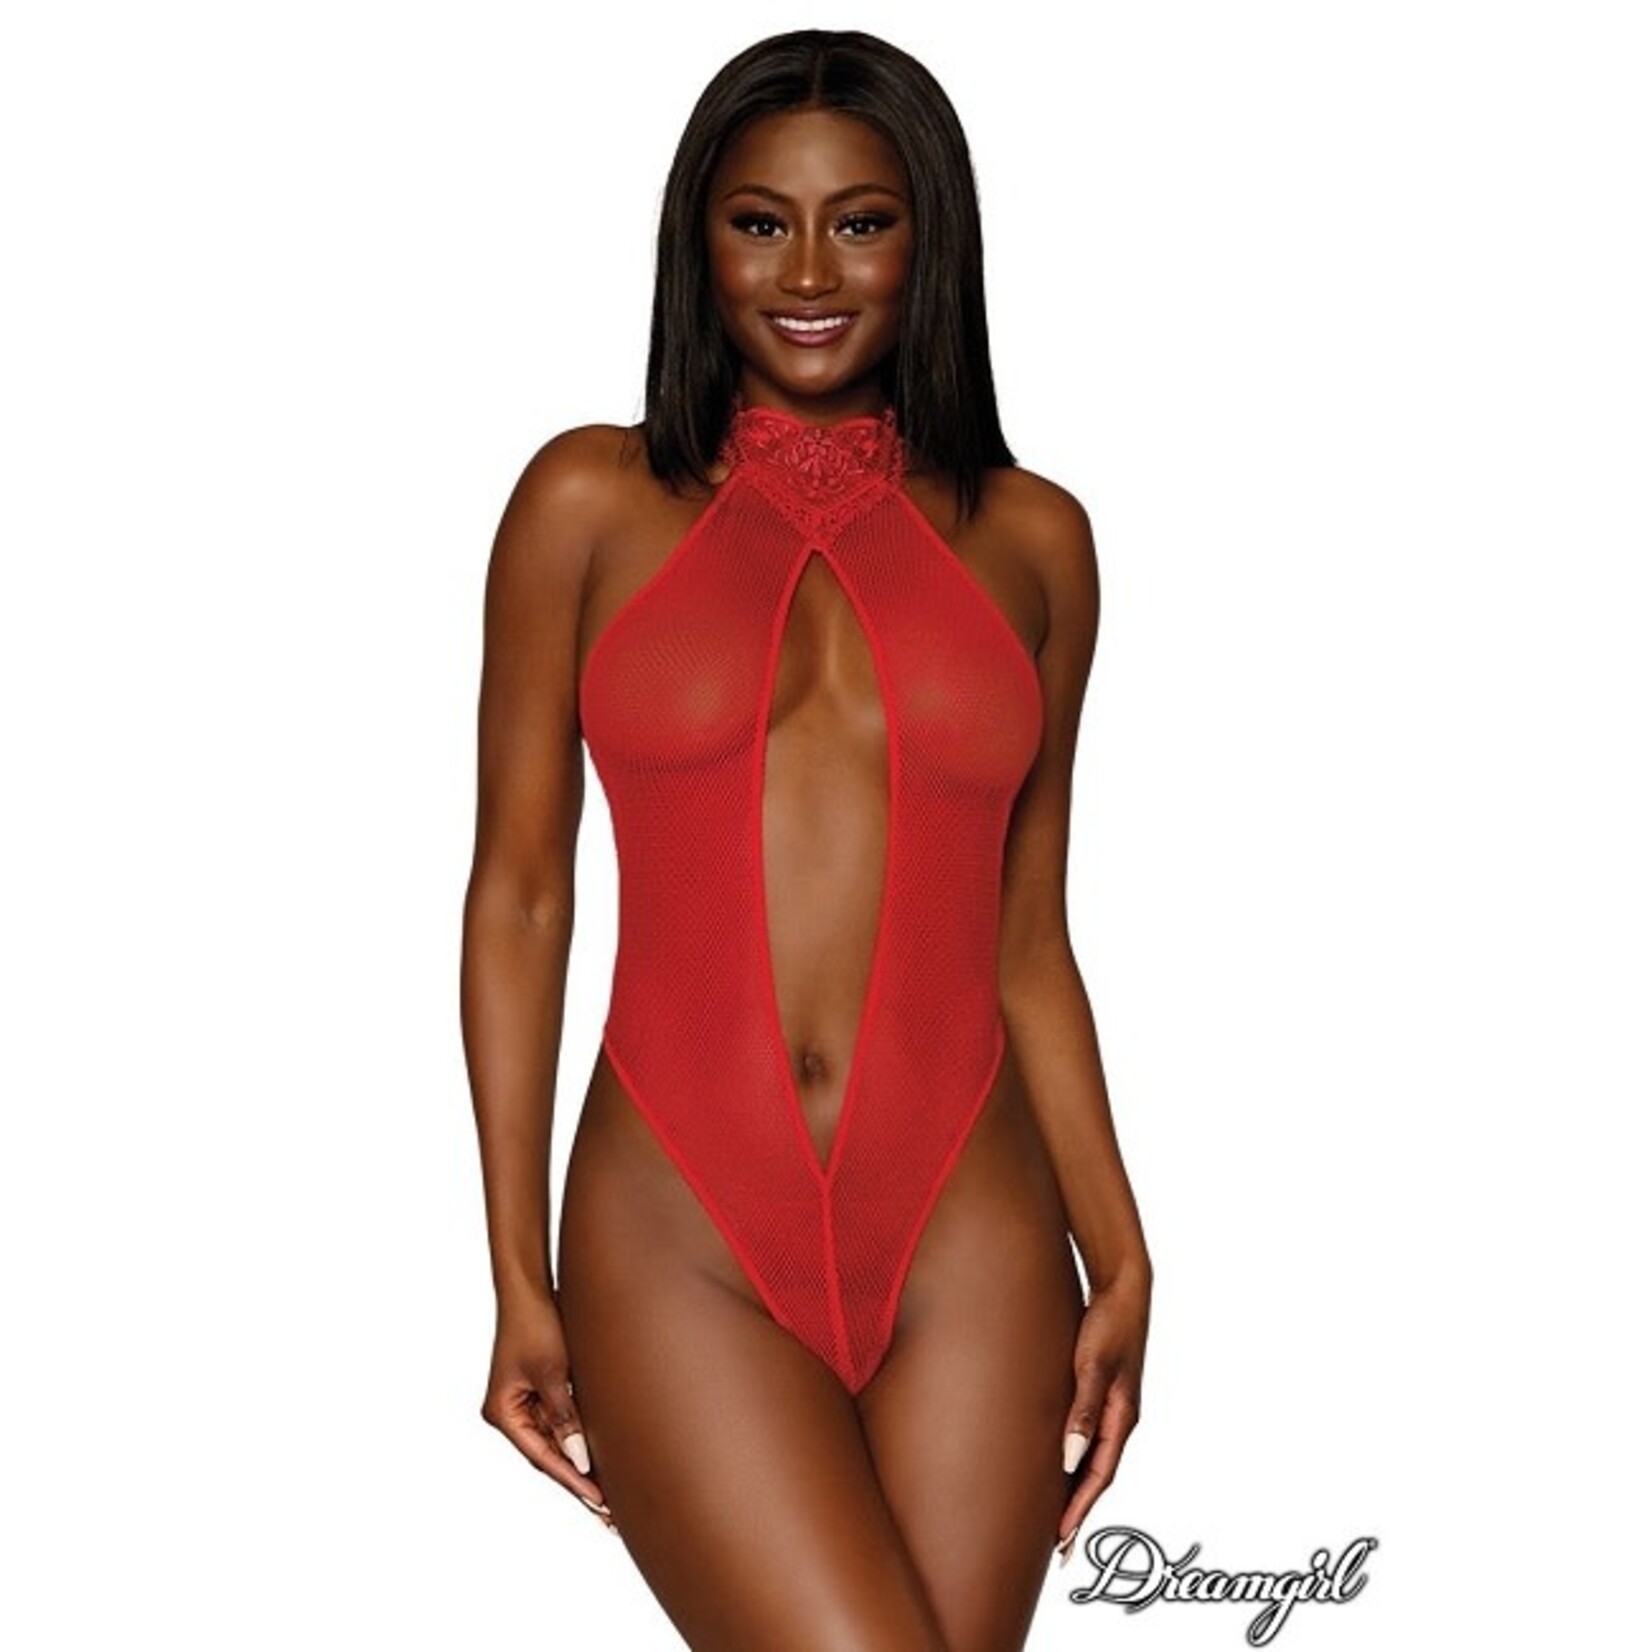 Dreamgirl Dreamgirl Lipstick Red Fishnet & Lace Pearl Back Teddy OS